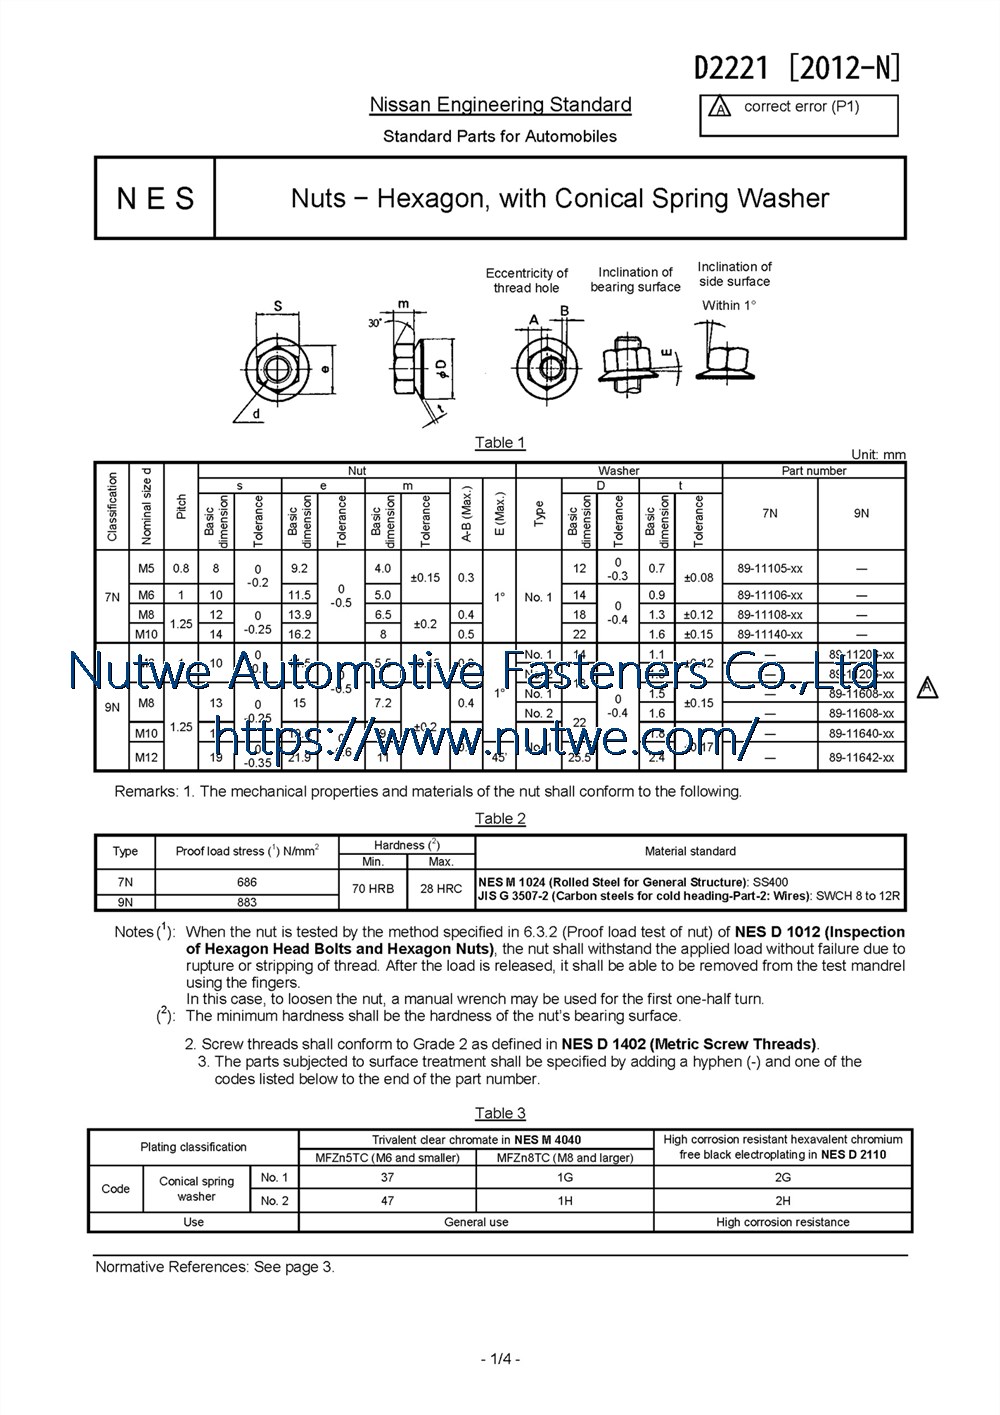 NES D2221 89-11105 Hexagon Nuts With Conical Washer Engineer Drawing and Technical Data Sheet